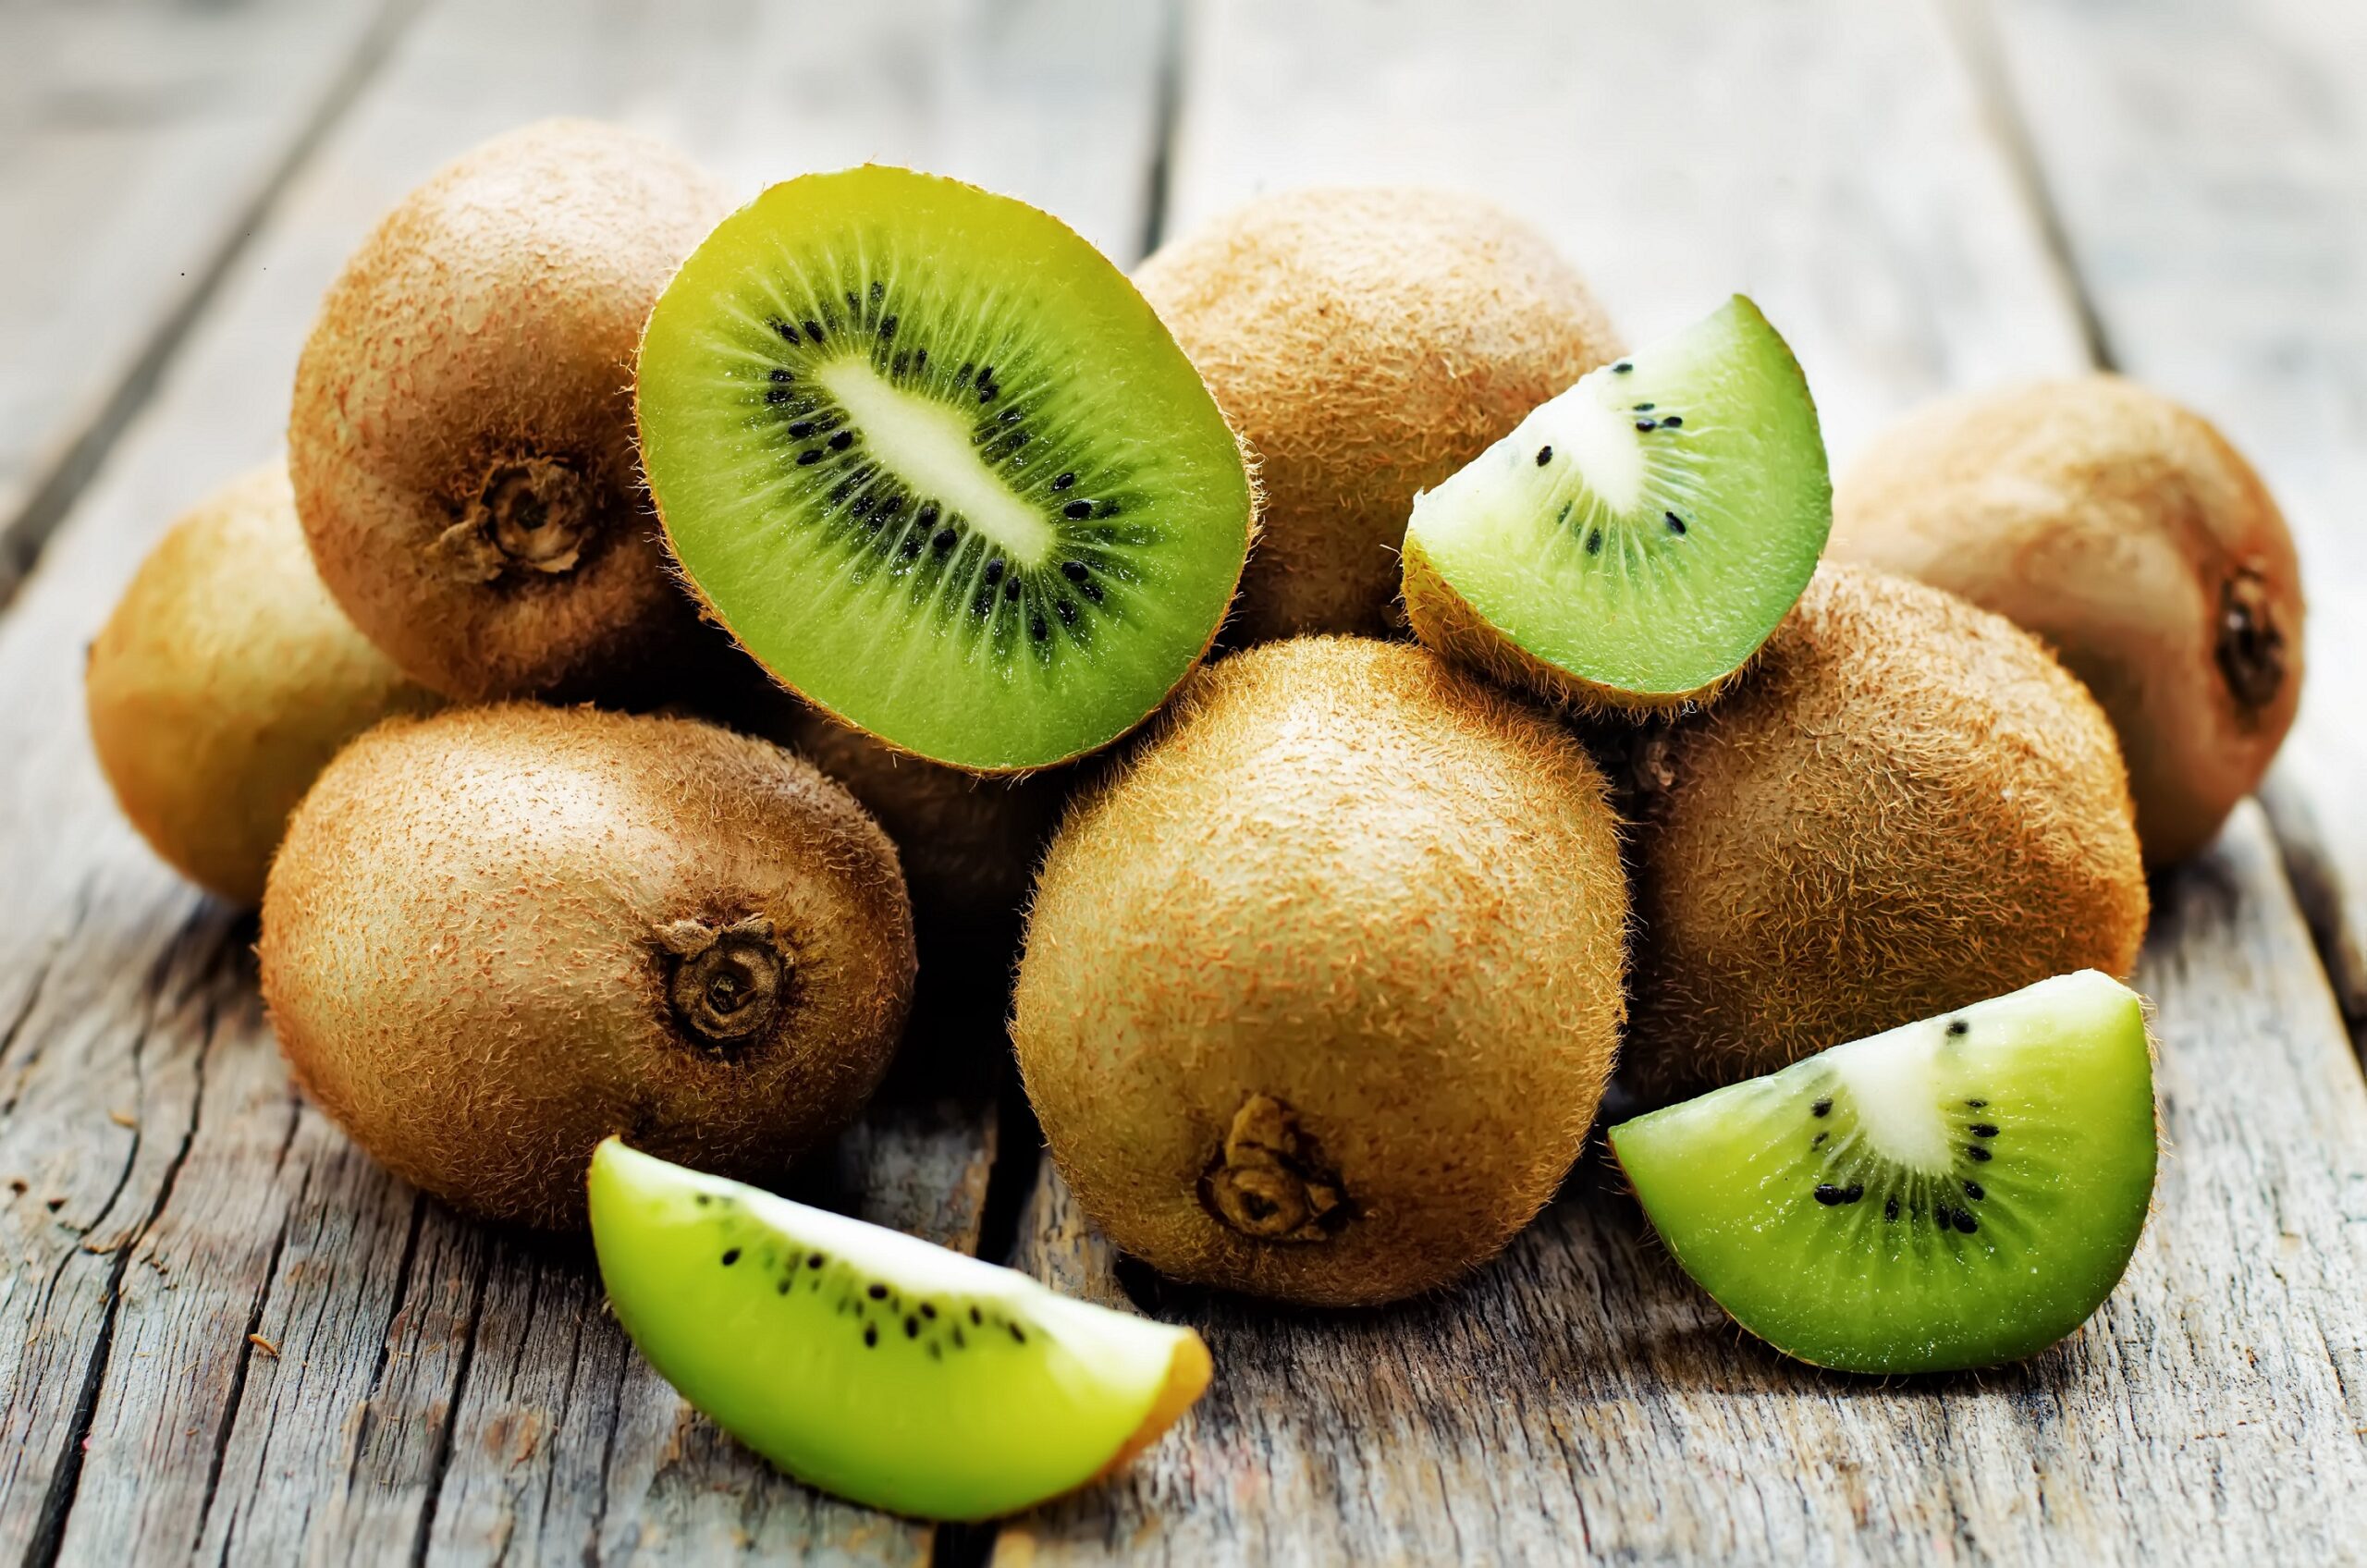 Kiwis improve mood and vitality after just four days